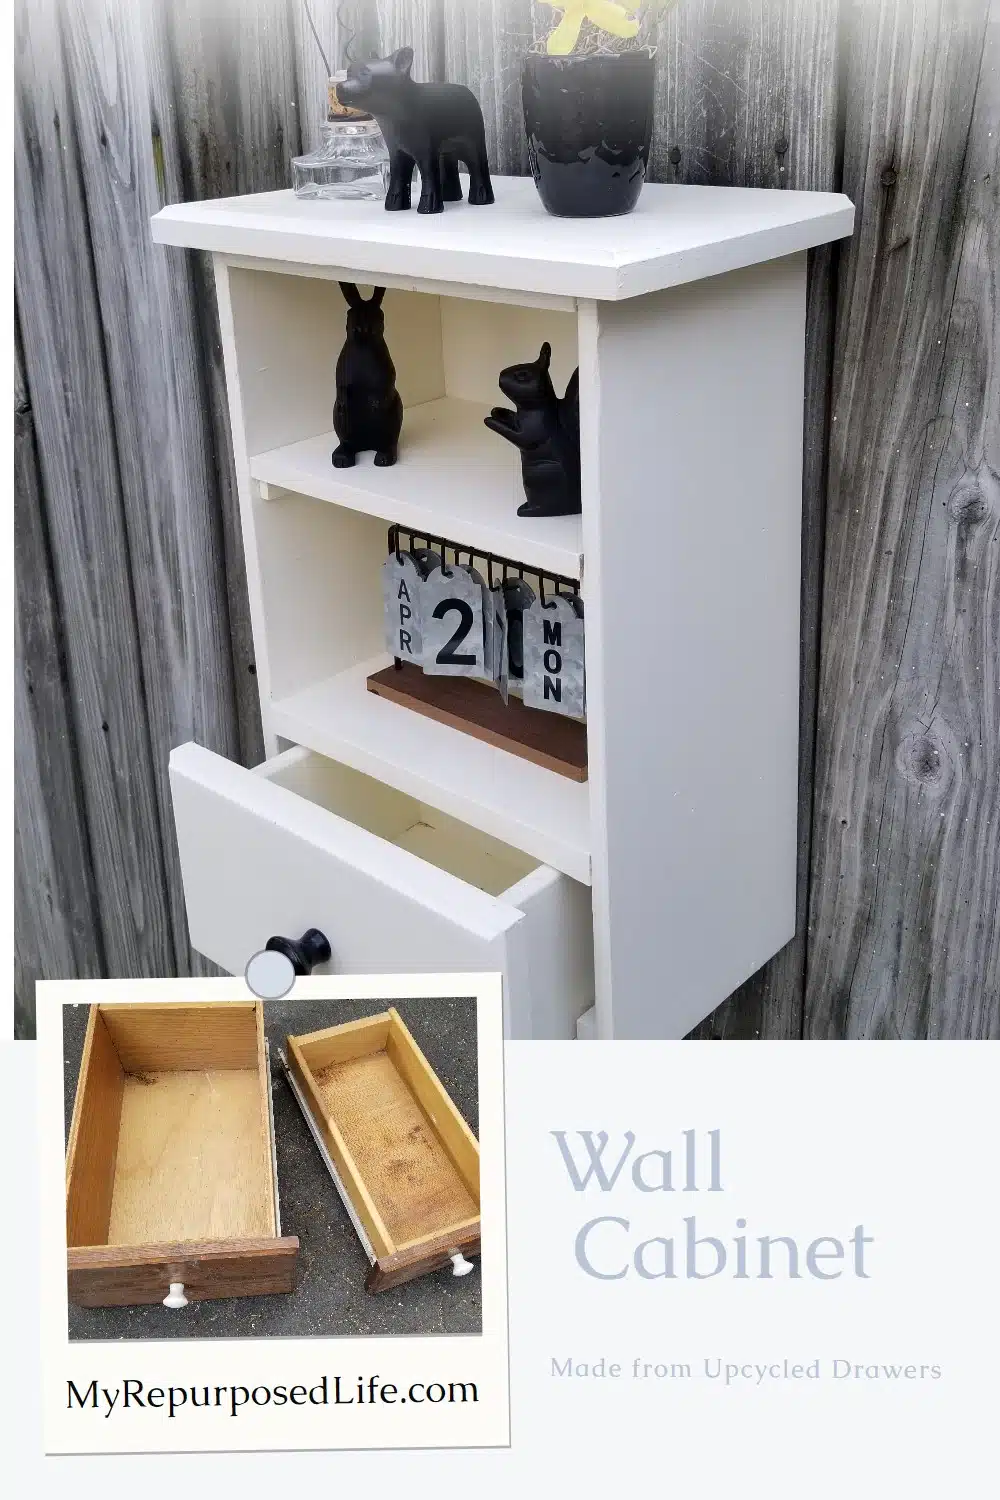 How to make a wall cabinet out of repurposed drawers. Use one drawer vertically, cut the other drawer down to size and voila! You have an awesome display cabinet with a drawer. Directions for you to make something similar! Repurpose those drawers you have hanging around. #MyRepurposedLife #repurposed #furniture #drawers #cabinet #homedecor via @repurposedlife